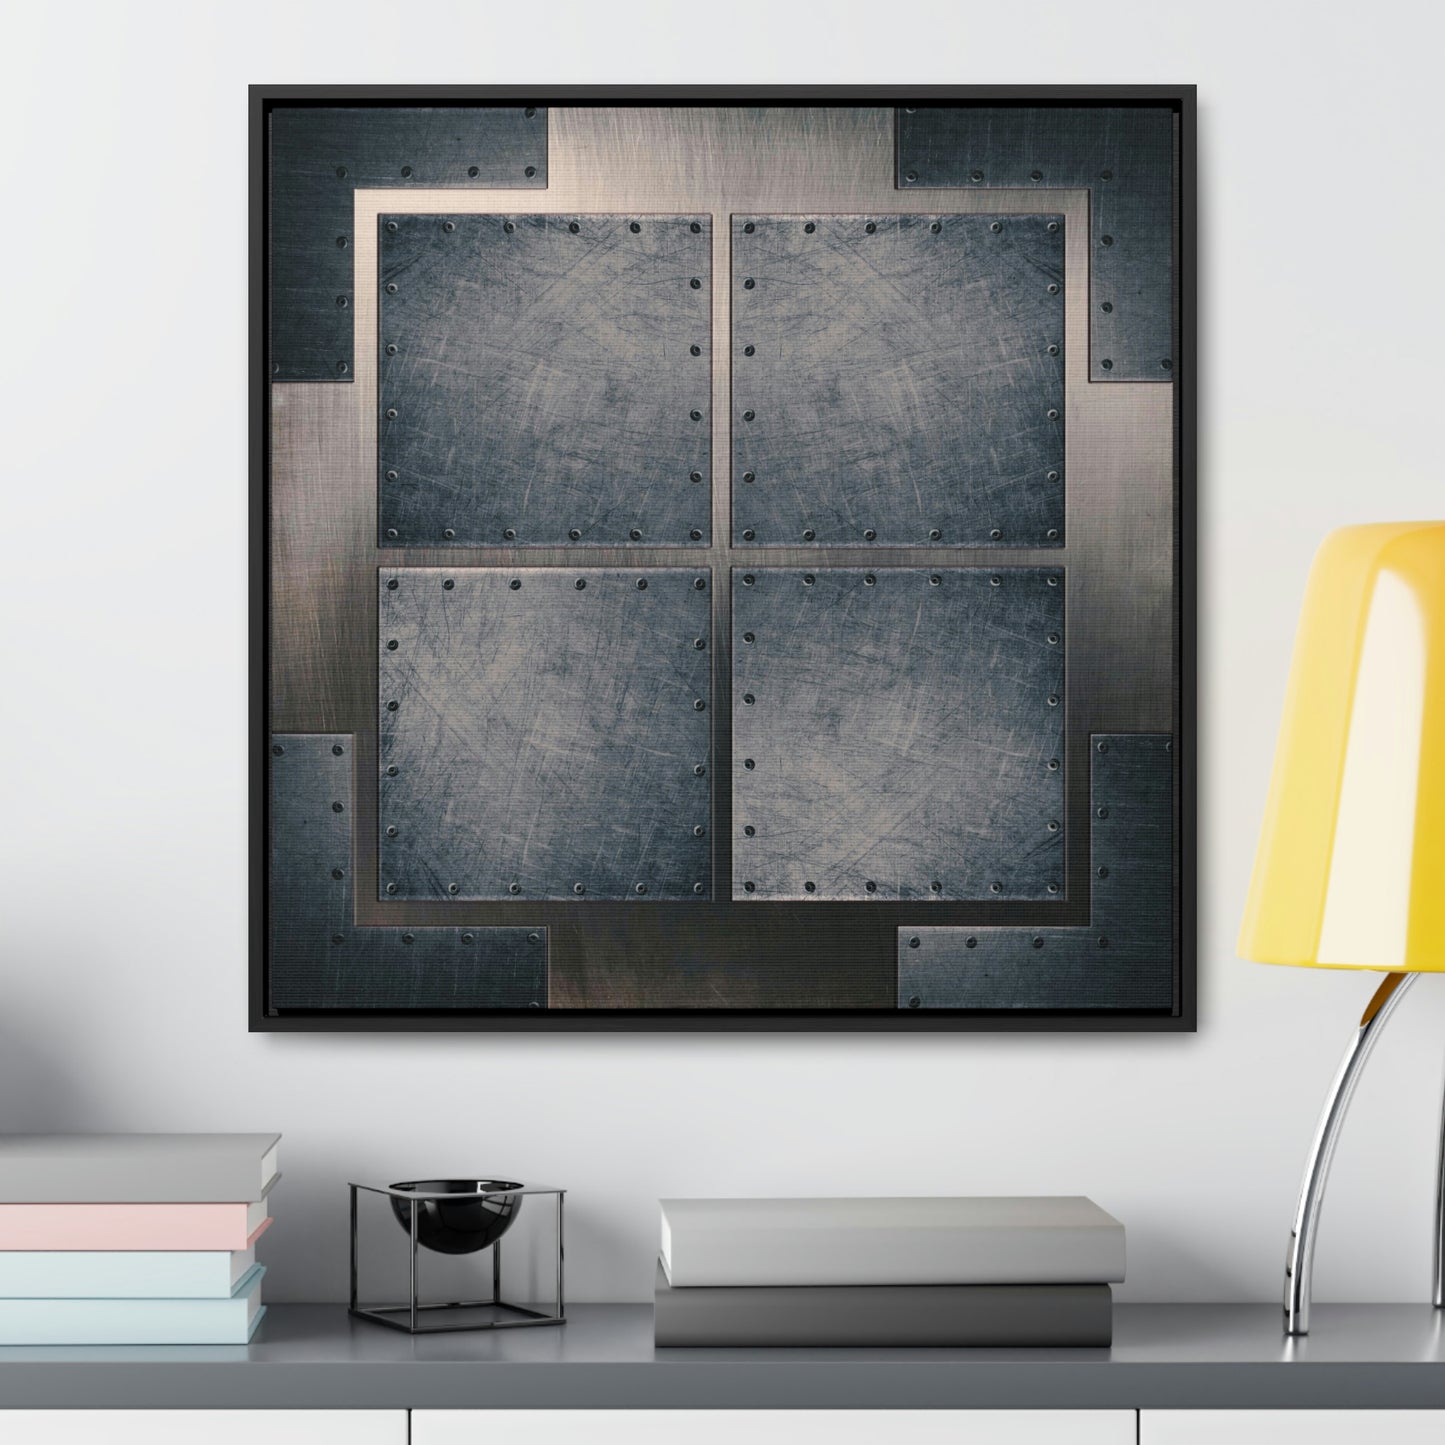 Industrial Themed Wall Decor - Distressed Steel Sheets Print on Canvas in a Floating Frame hung on white wall